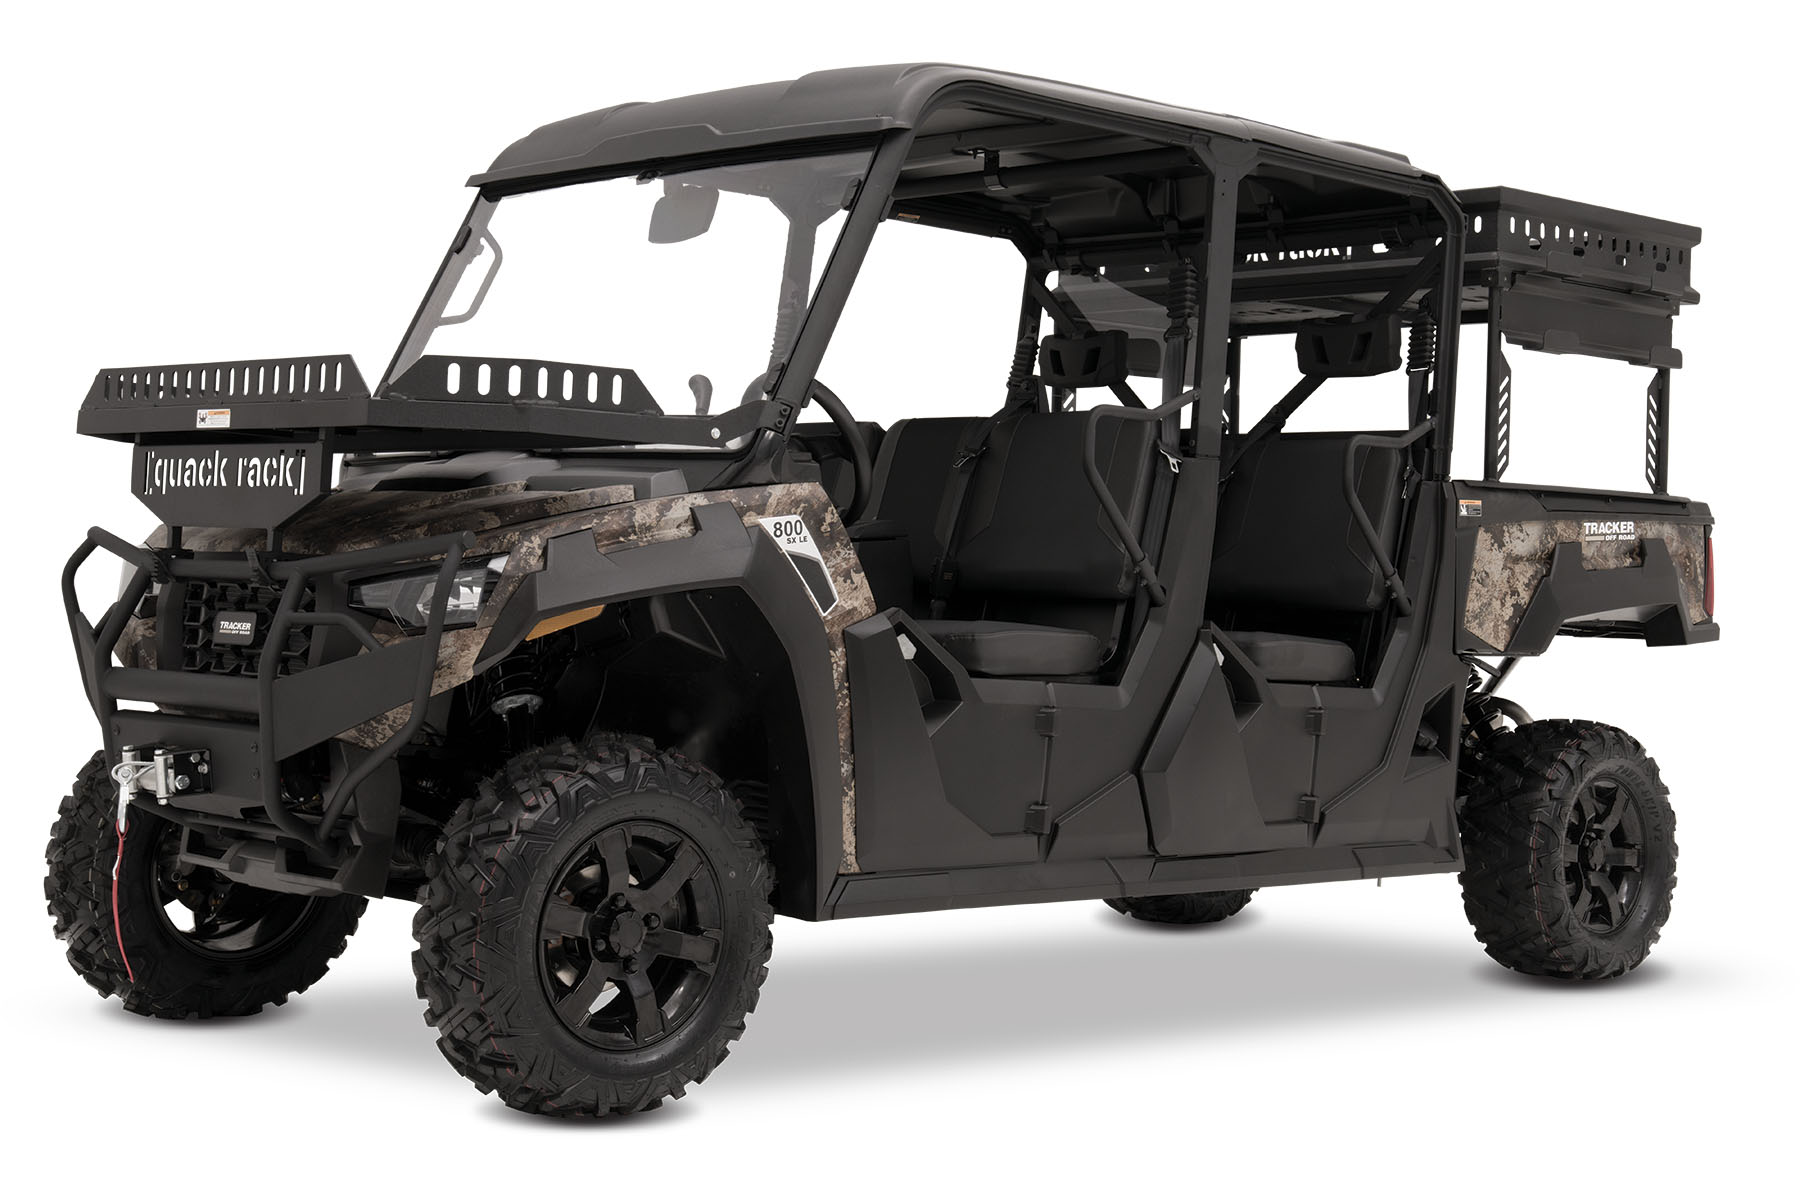 TRACKER Off Road Vehicles - Shop all ATVs and Side by Side UTVs for Sale